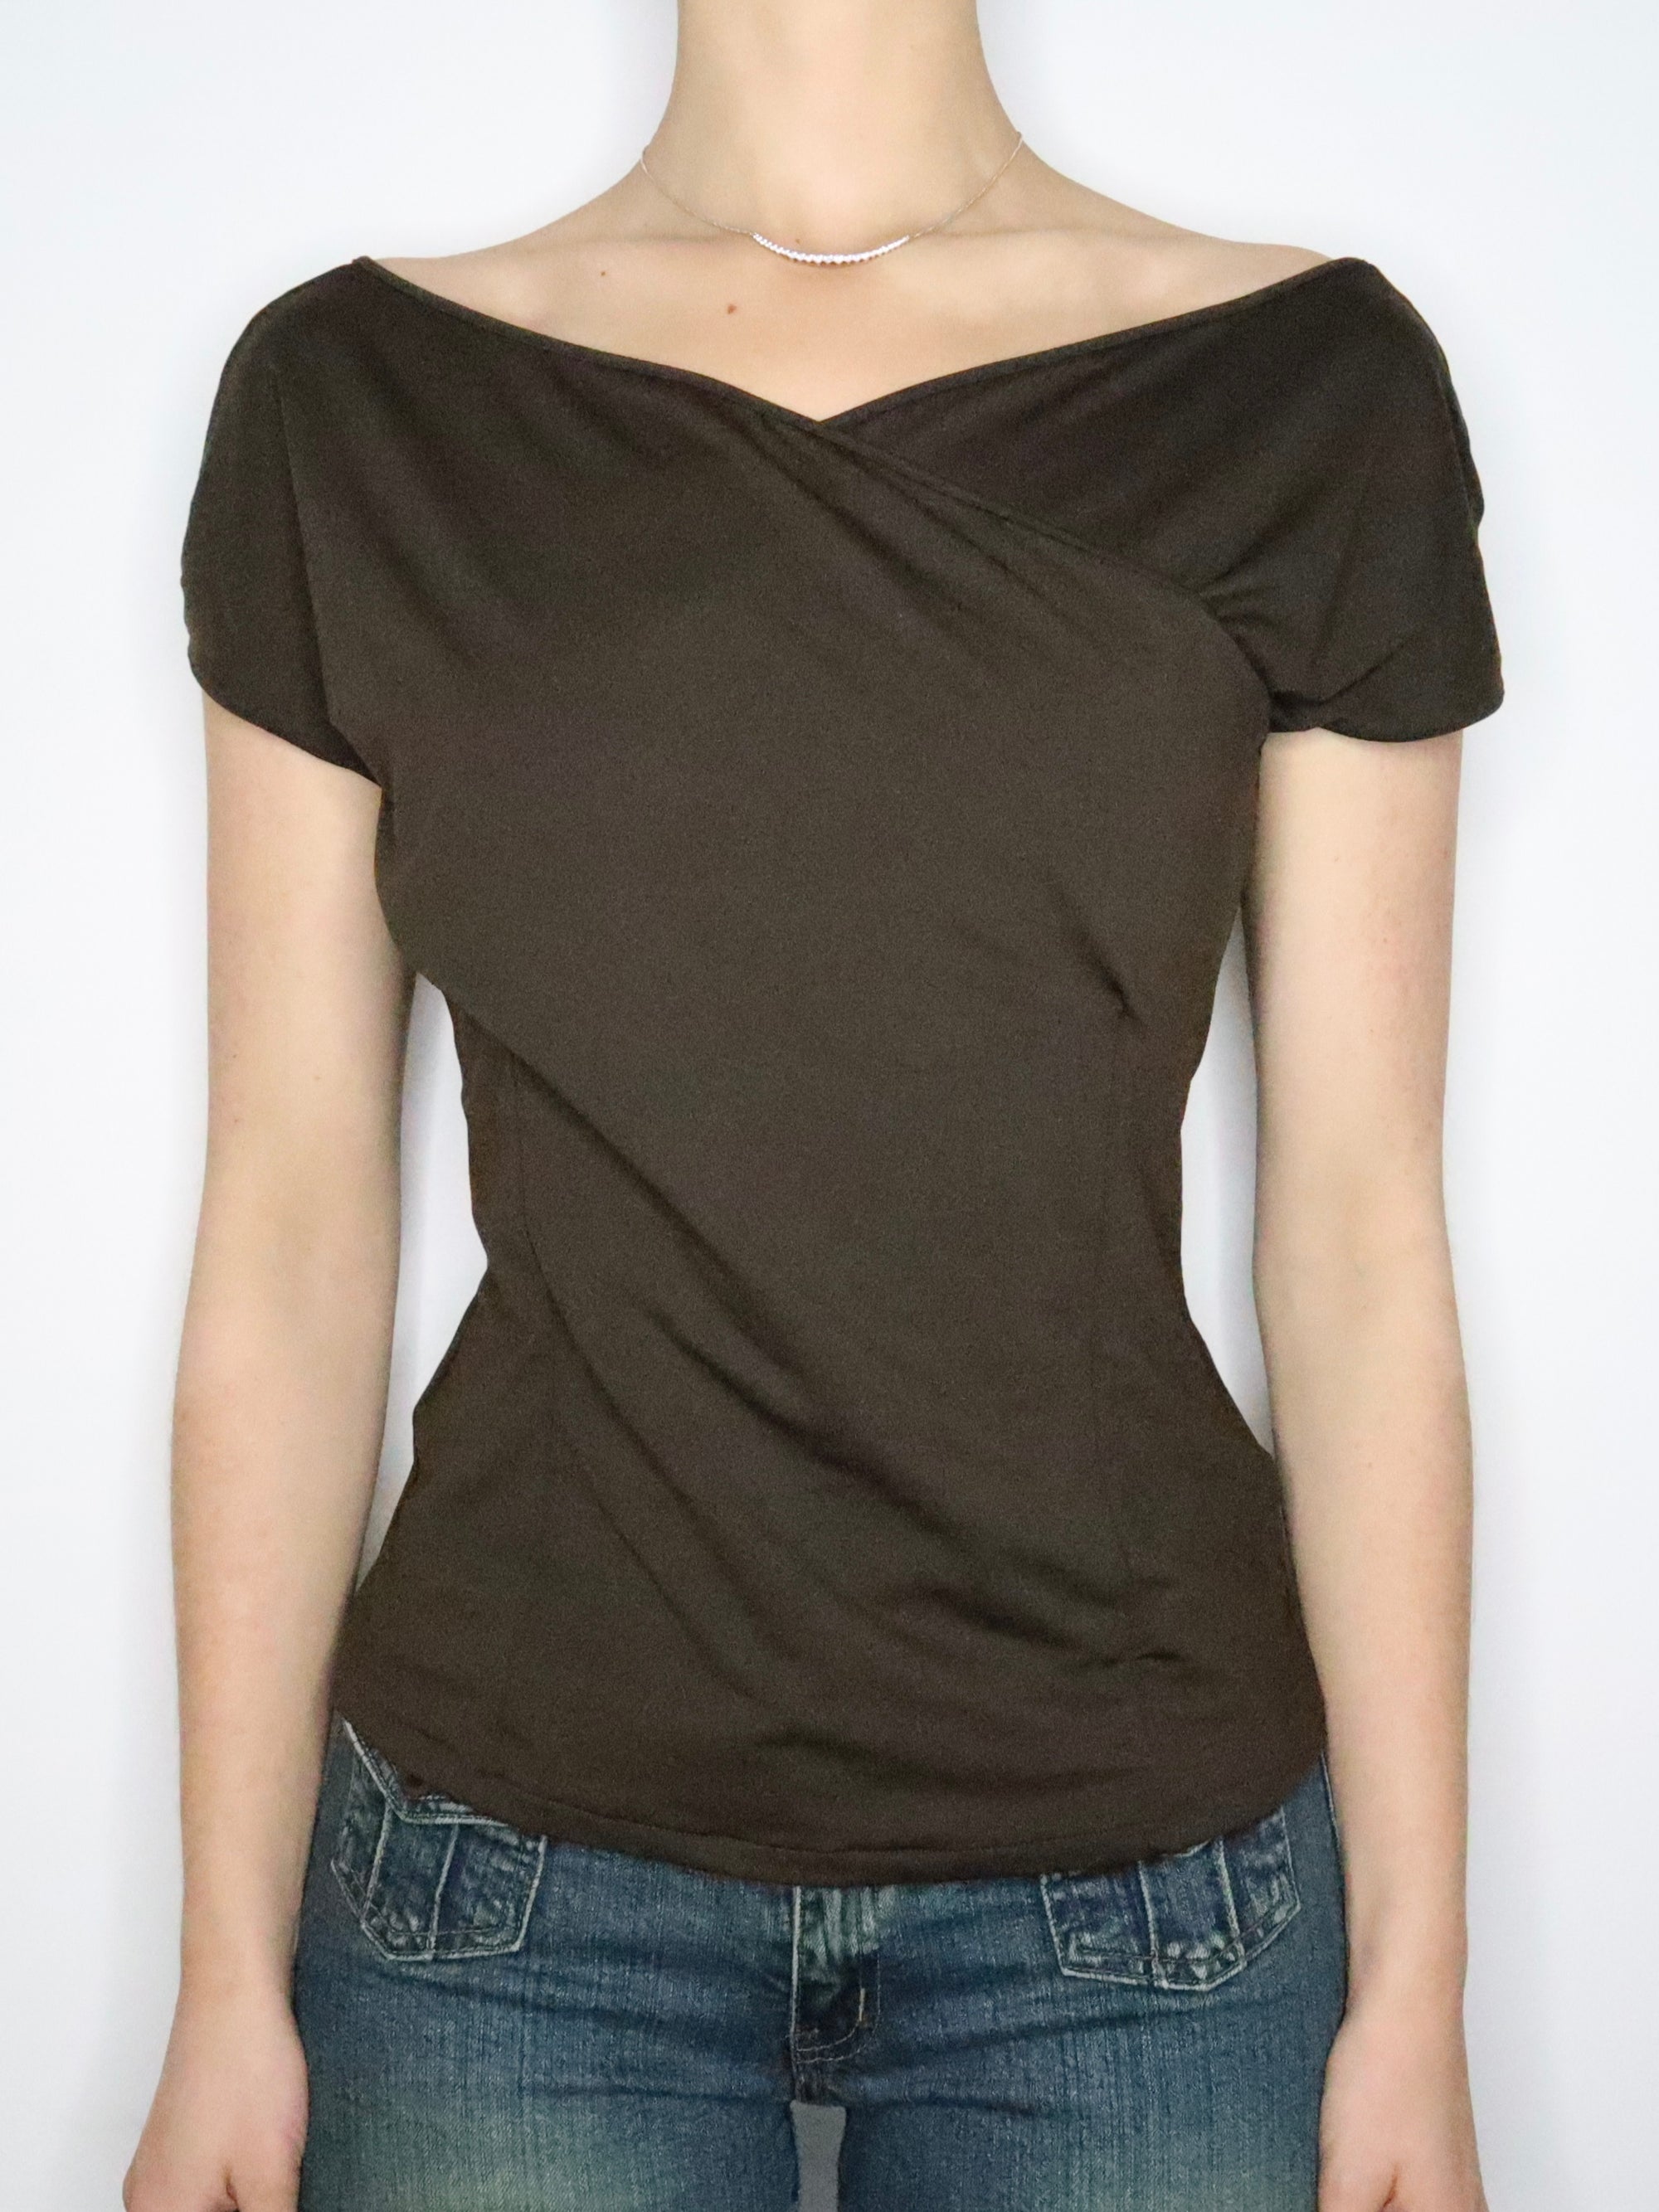 Gianfranco Ferre Brown Blouse (Large) 